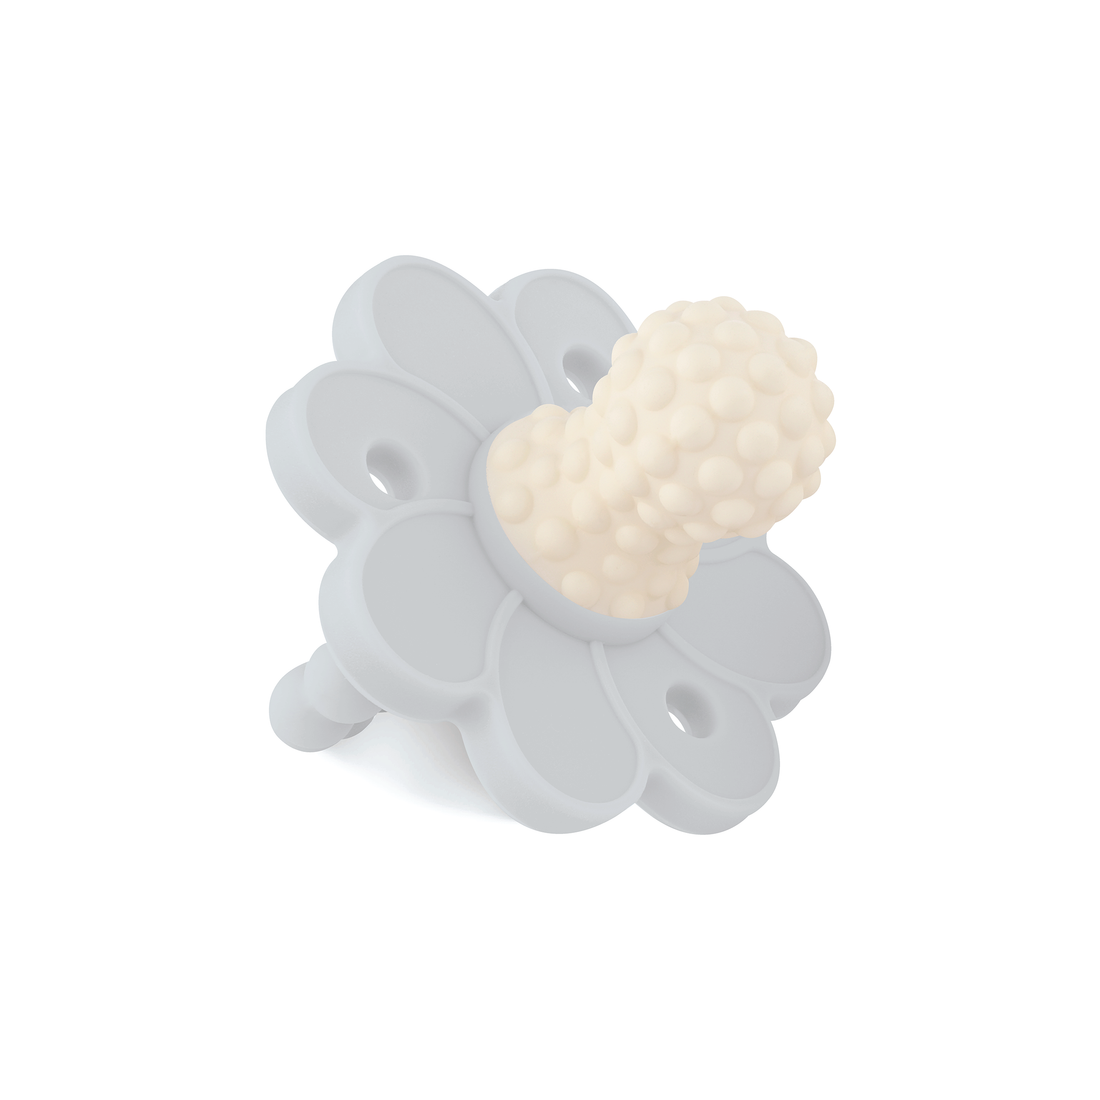 SoothiPop Silicone Teething Pacifier Flower Shaped - French Gray